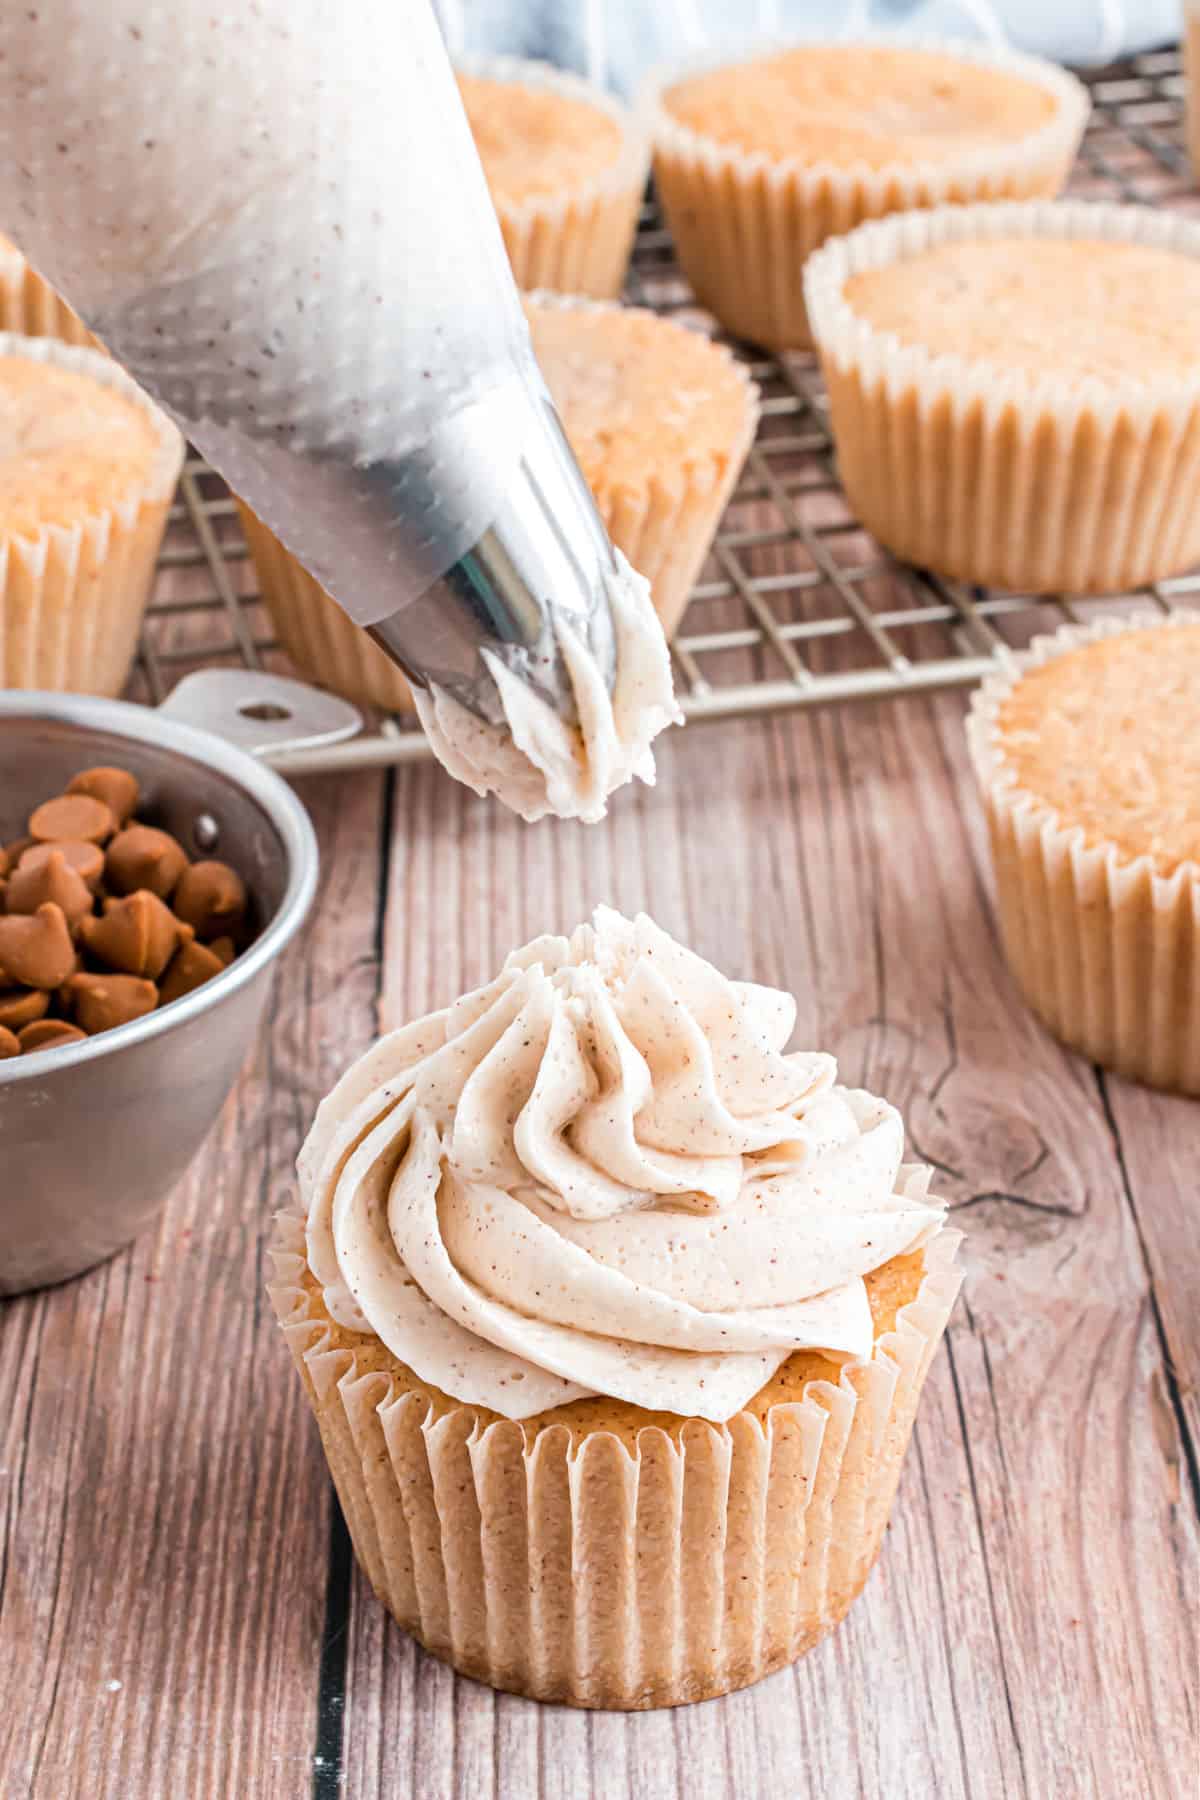 Cinnamon frosting being piped onto spice cupcakes.